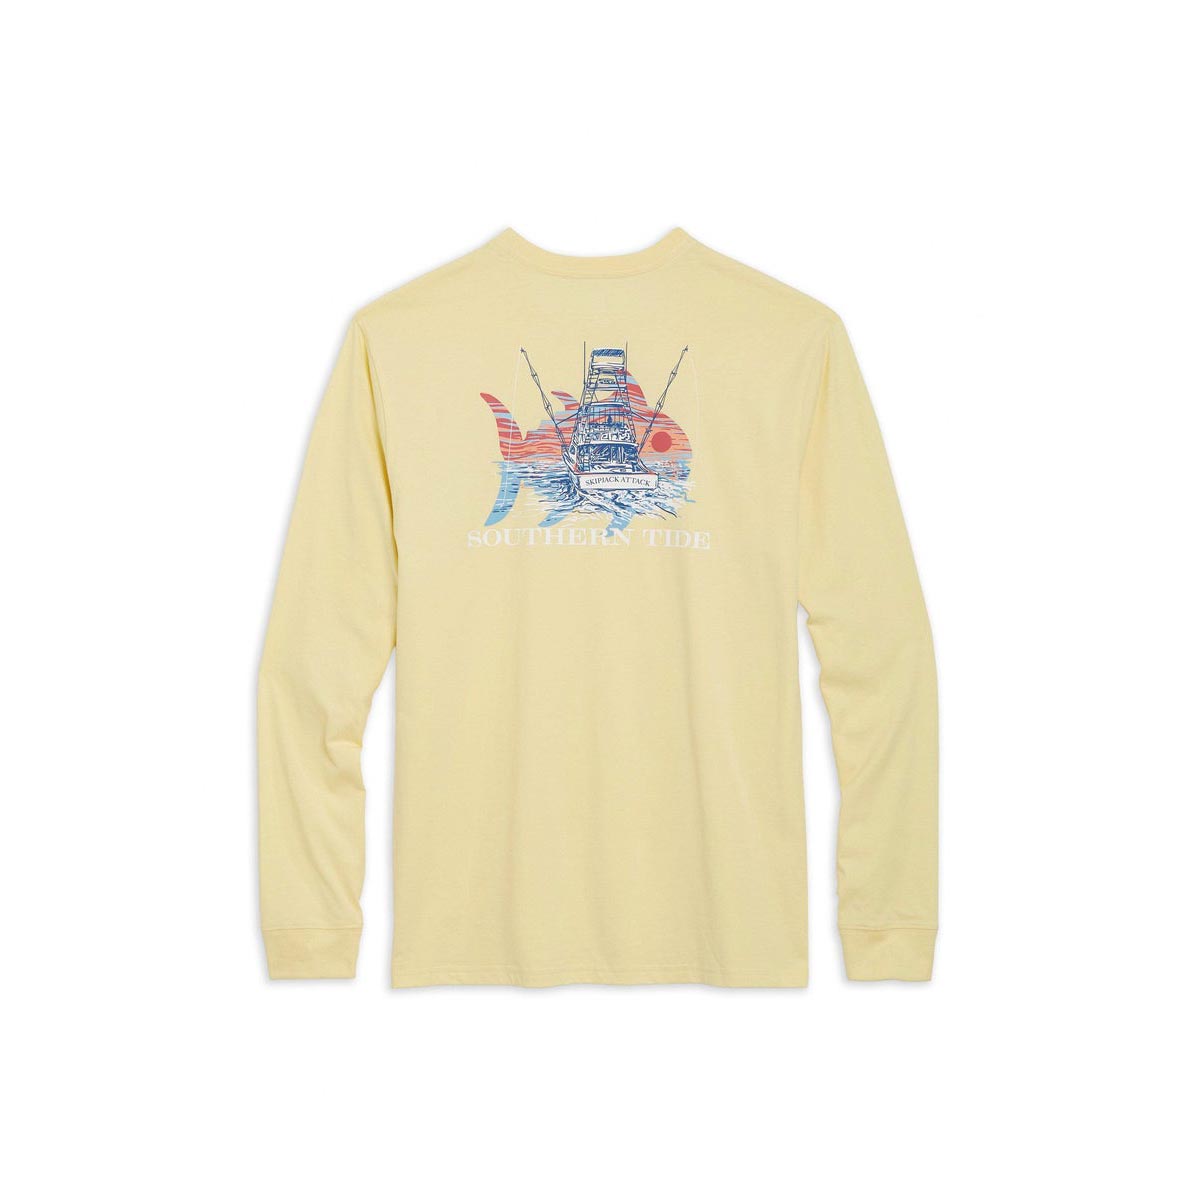 Southern Tide Men's Sunset Attack Tee